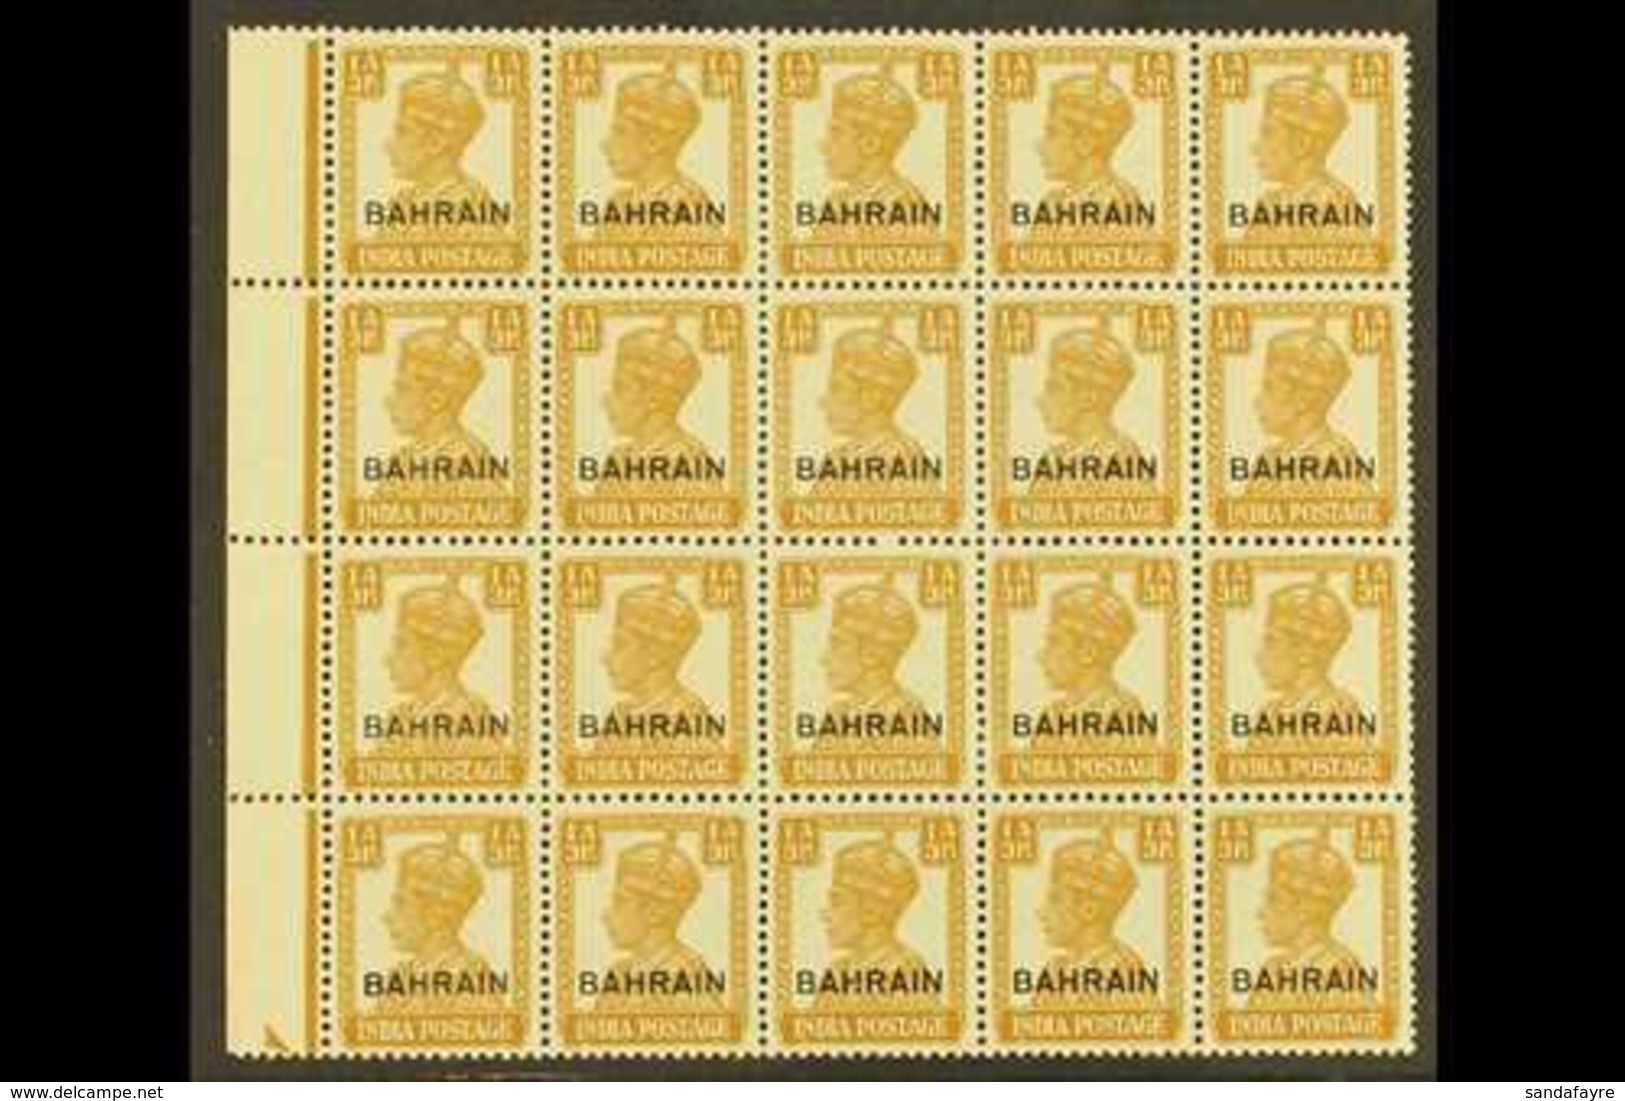 1942-45  1a3p Bistre, SG 42, Never Hinged Mint Marginal BLOCK OF 20 Stamps. Lovely (1 Block Of 20) For More Images, Plea - Bahrein (...-1965)